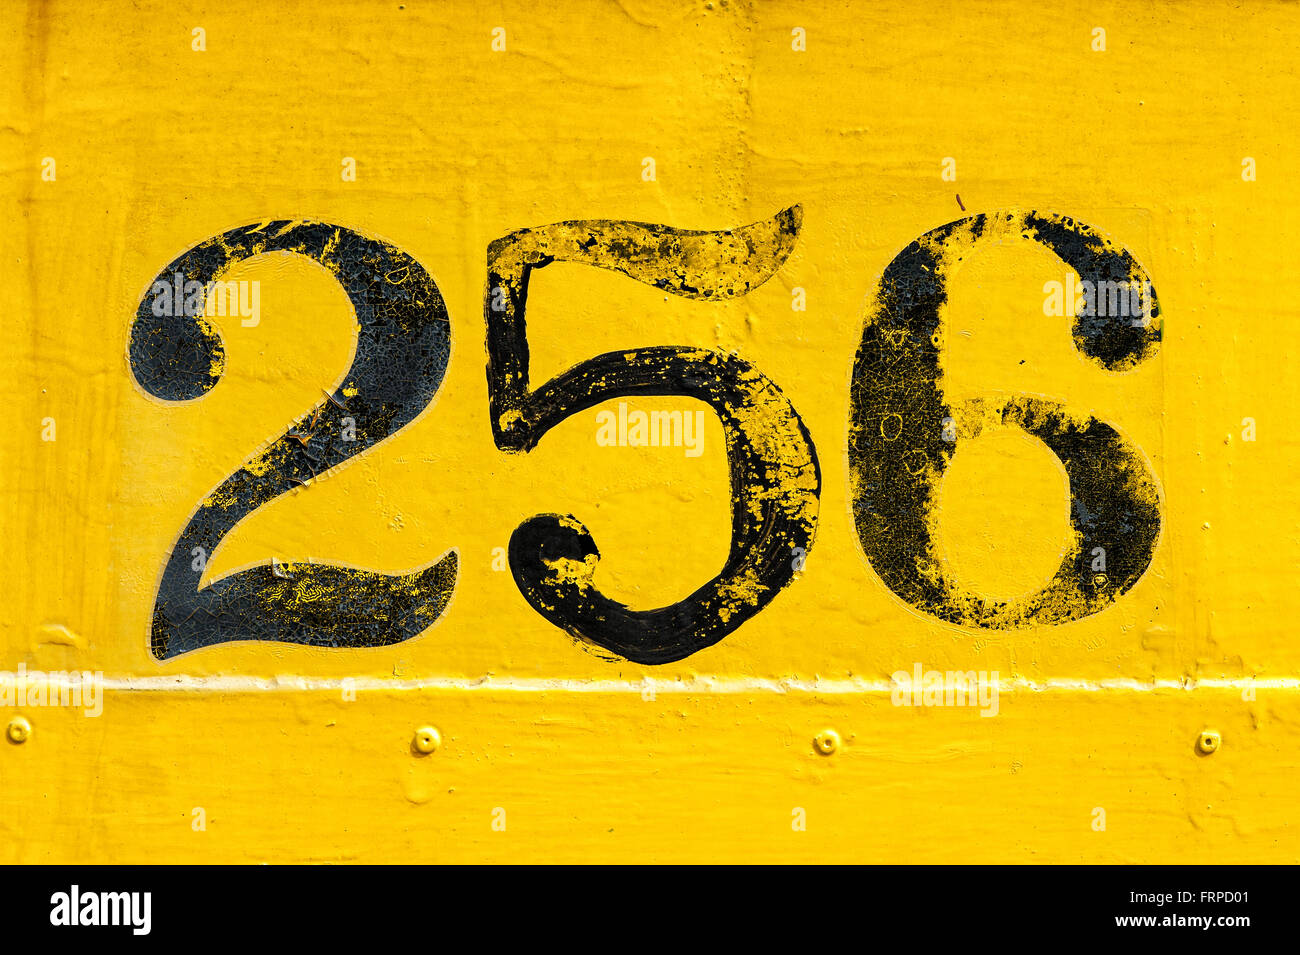 Black number 256 painted over old weathered yellow background with metal texture and rivets Stock Photo